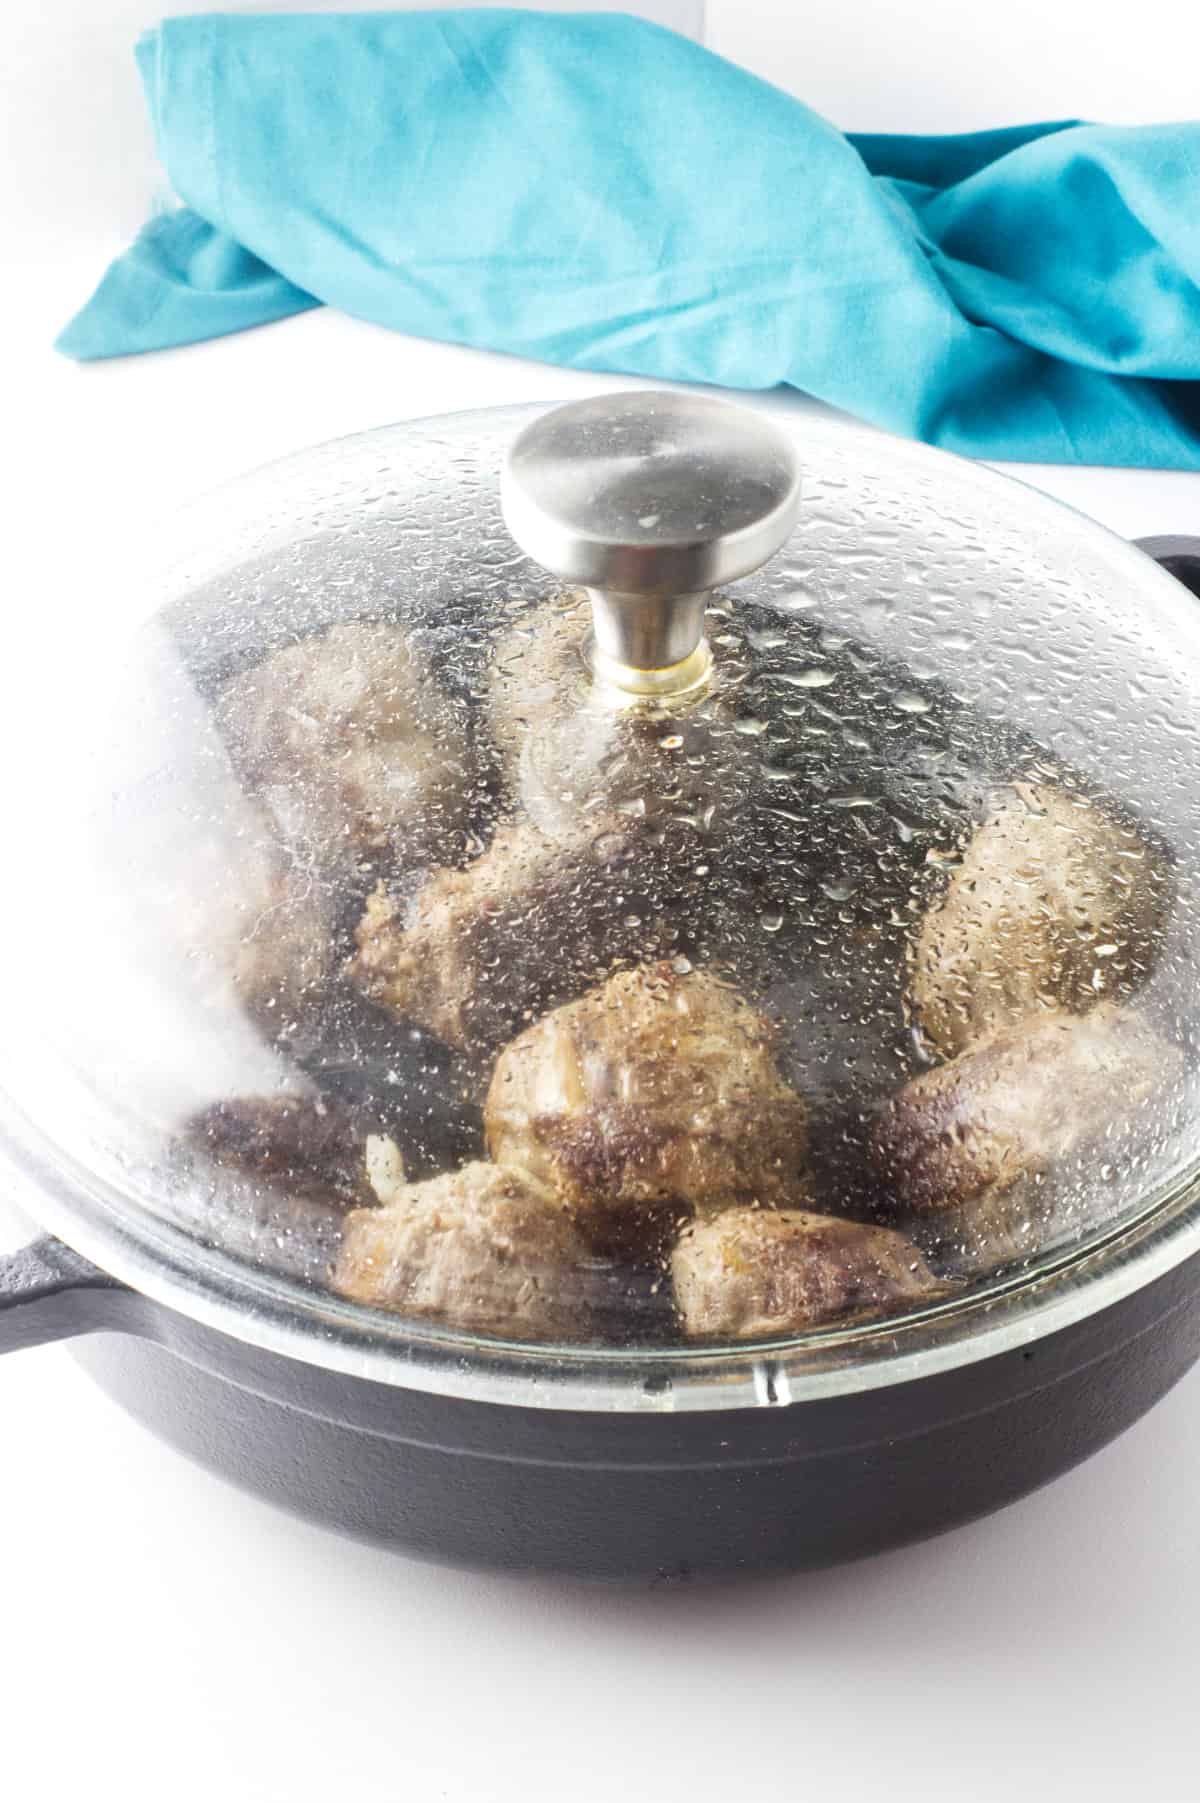 clear lid covered skillet of lamb kofta balls cooking on how heat.